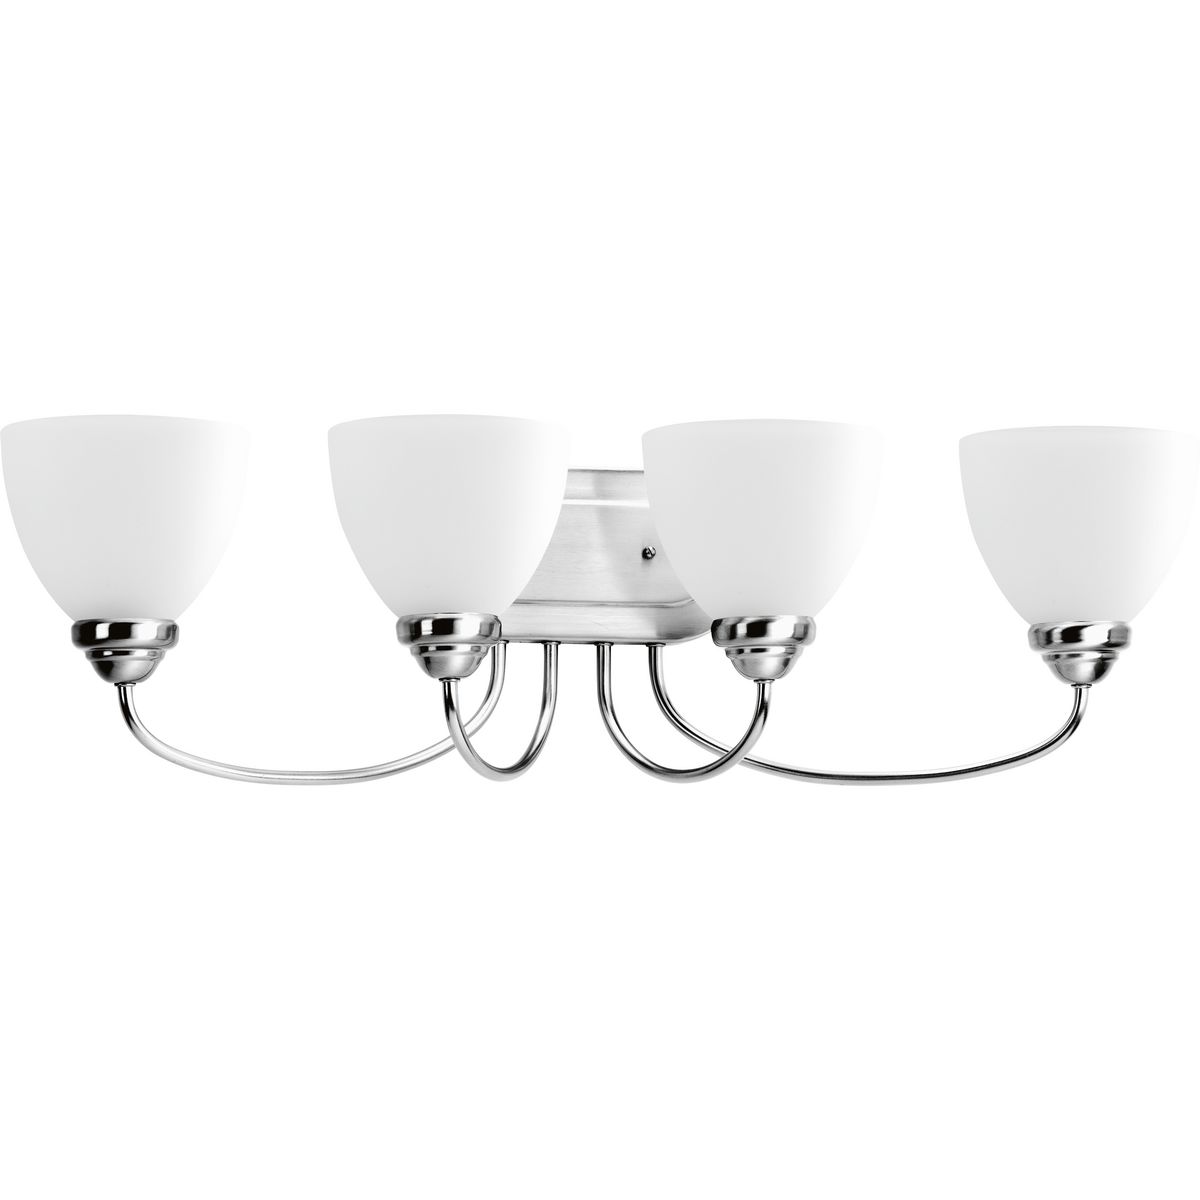 The Heart Collection possesses a smart simplicity to complement today's home. This four-light bath bracket includes etched glass shades to add distinction and provide pleasing illumination to any room. Versatile design permits installation of fixture facing either upwards or downwards. Polished Chrome scroll arms create an airy effect.